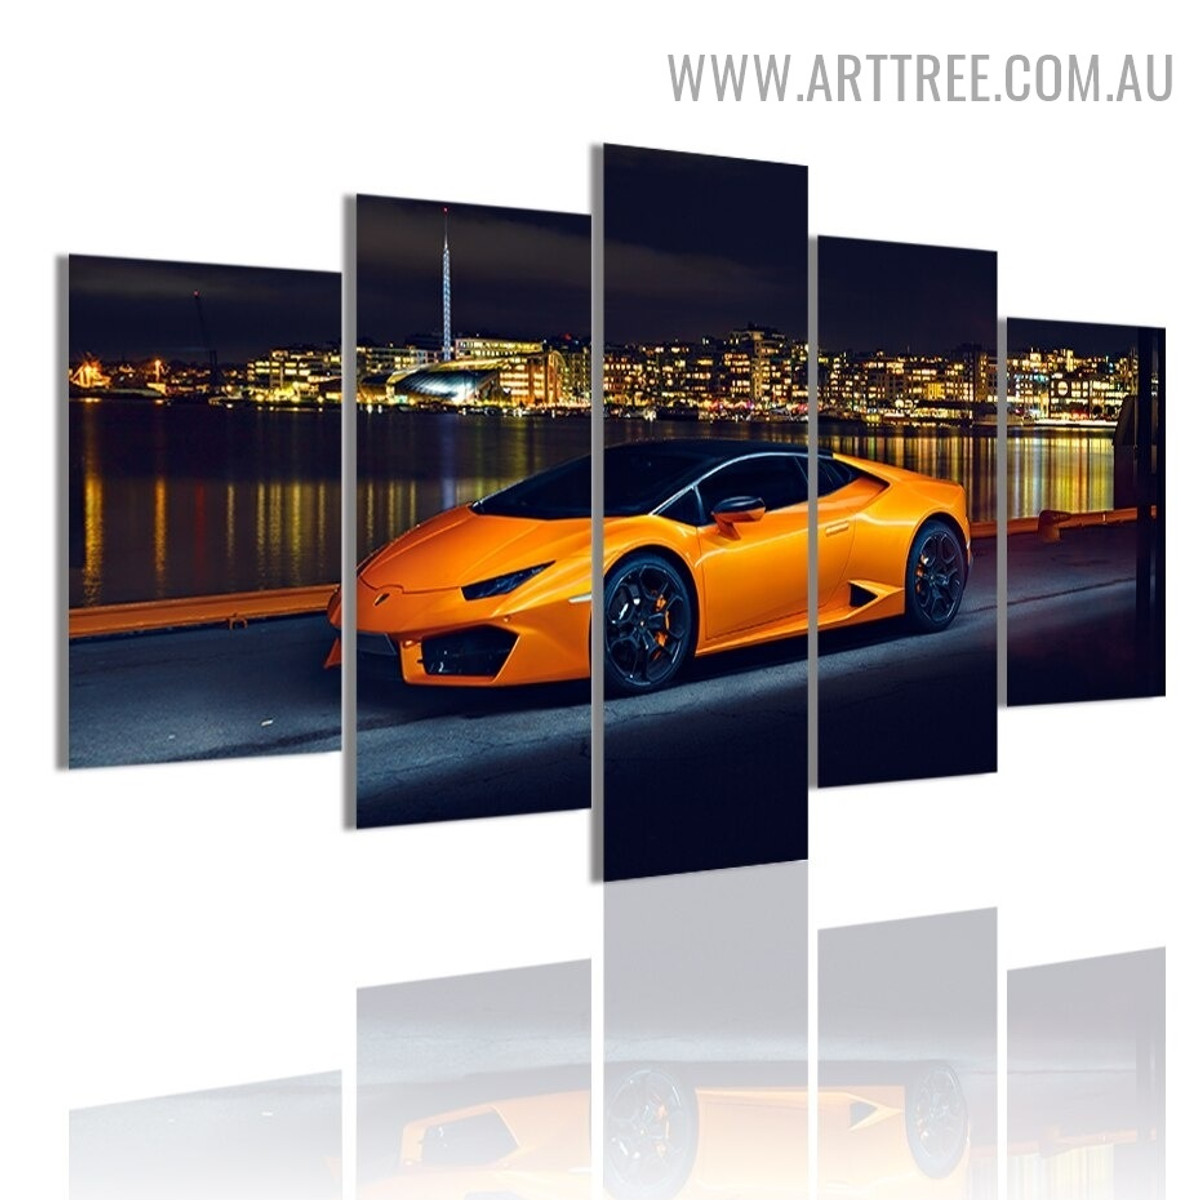 Lamborghini Aventador Buildings 5 Piece Landscape Modern Over Size Image Canvas Painting Print for Room Wall Getup